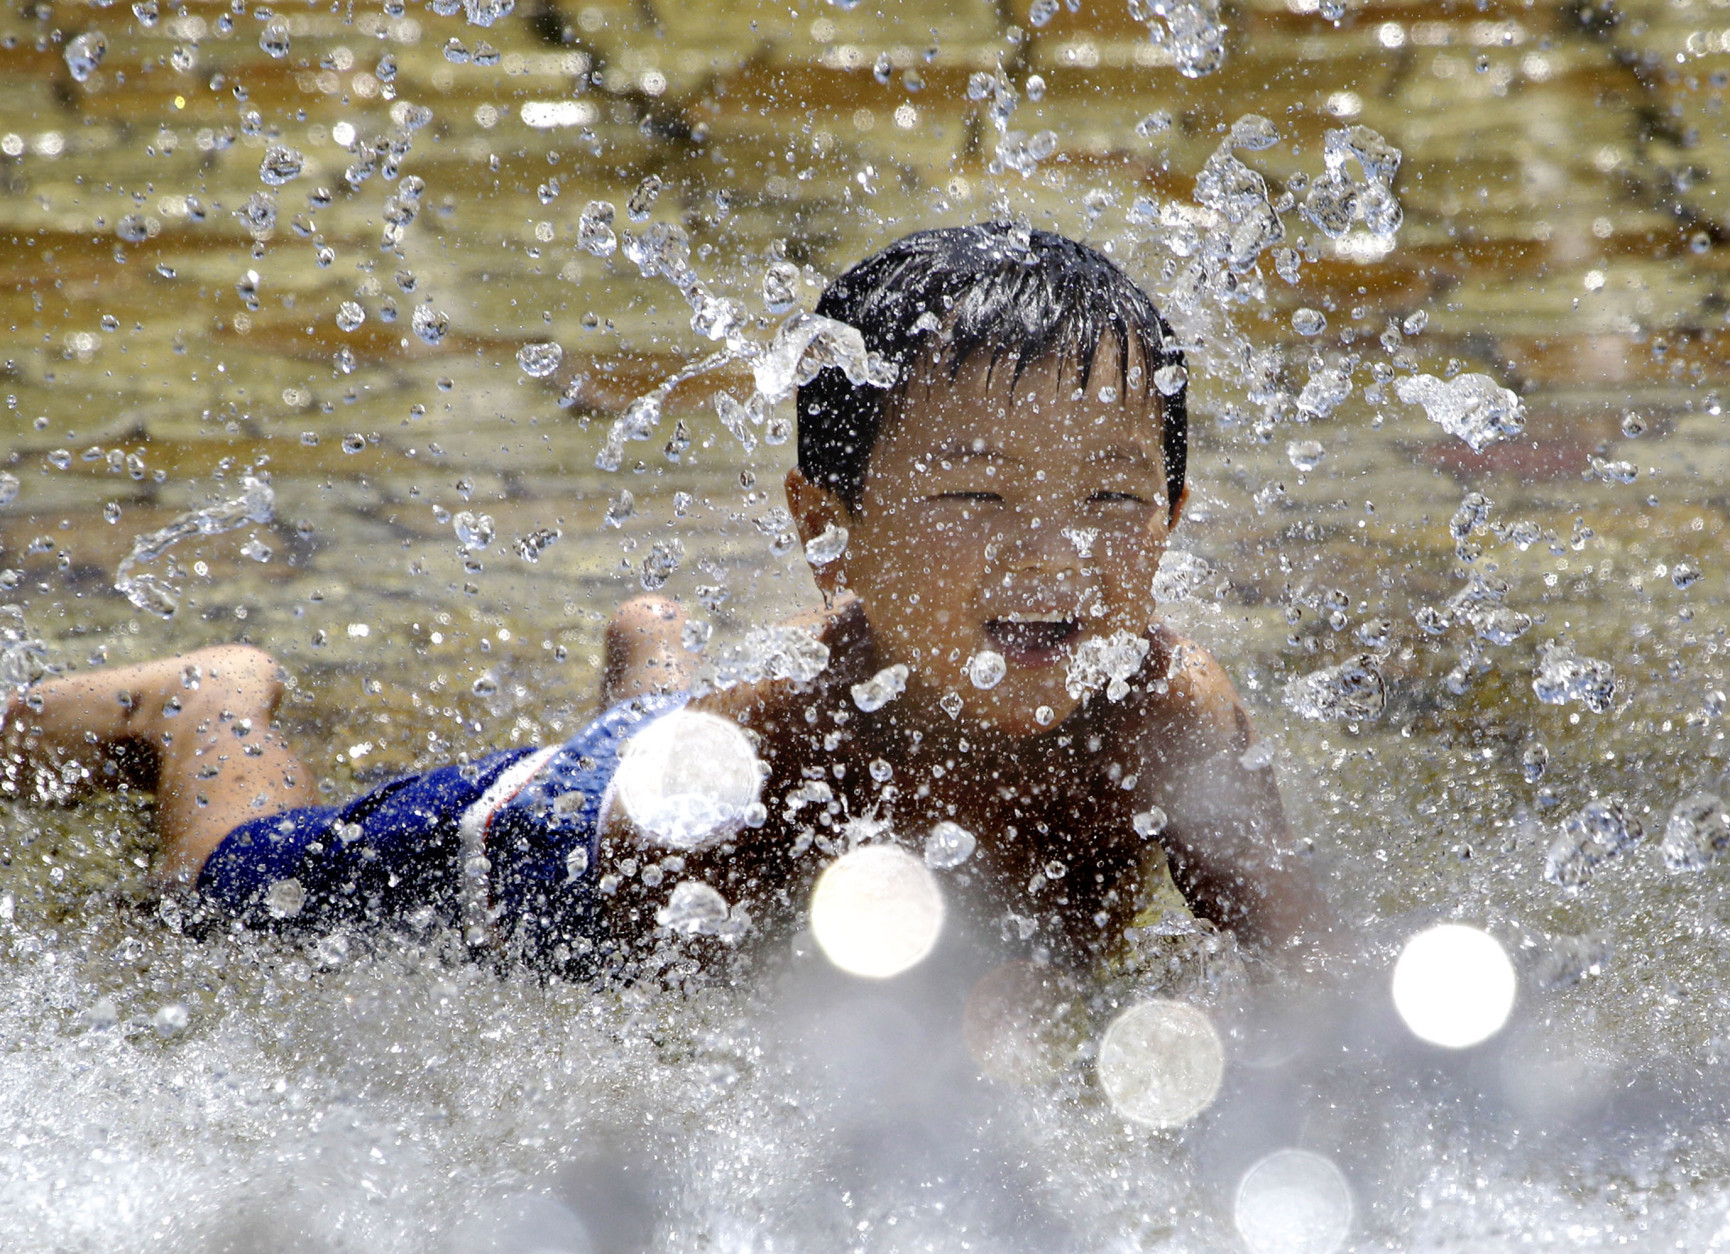 A boy tries to beat summer heat with splashed water at a Tokyo park Saturday, July 17, 2010. The Japan Meteorological Agency on Saturday said the temperature in central Tokyo shot up to 31 degrees Celsius (88 F) at noon as the weather men declared the rainy season seemed to be over in many parts of the nation, including the Tokyo area. (AP Photo/Koji Sasahara)